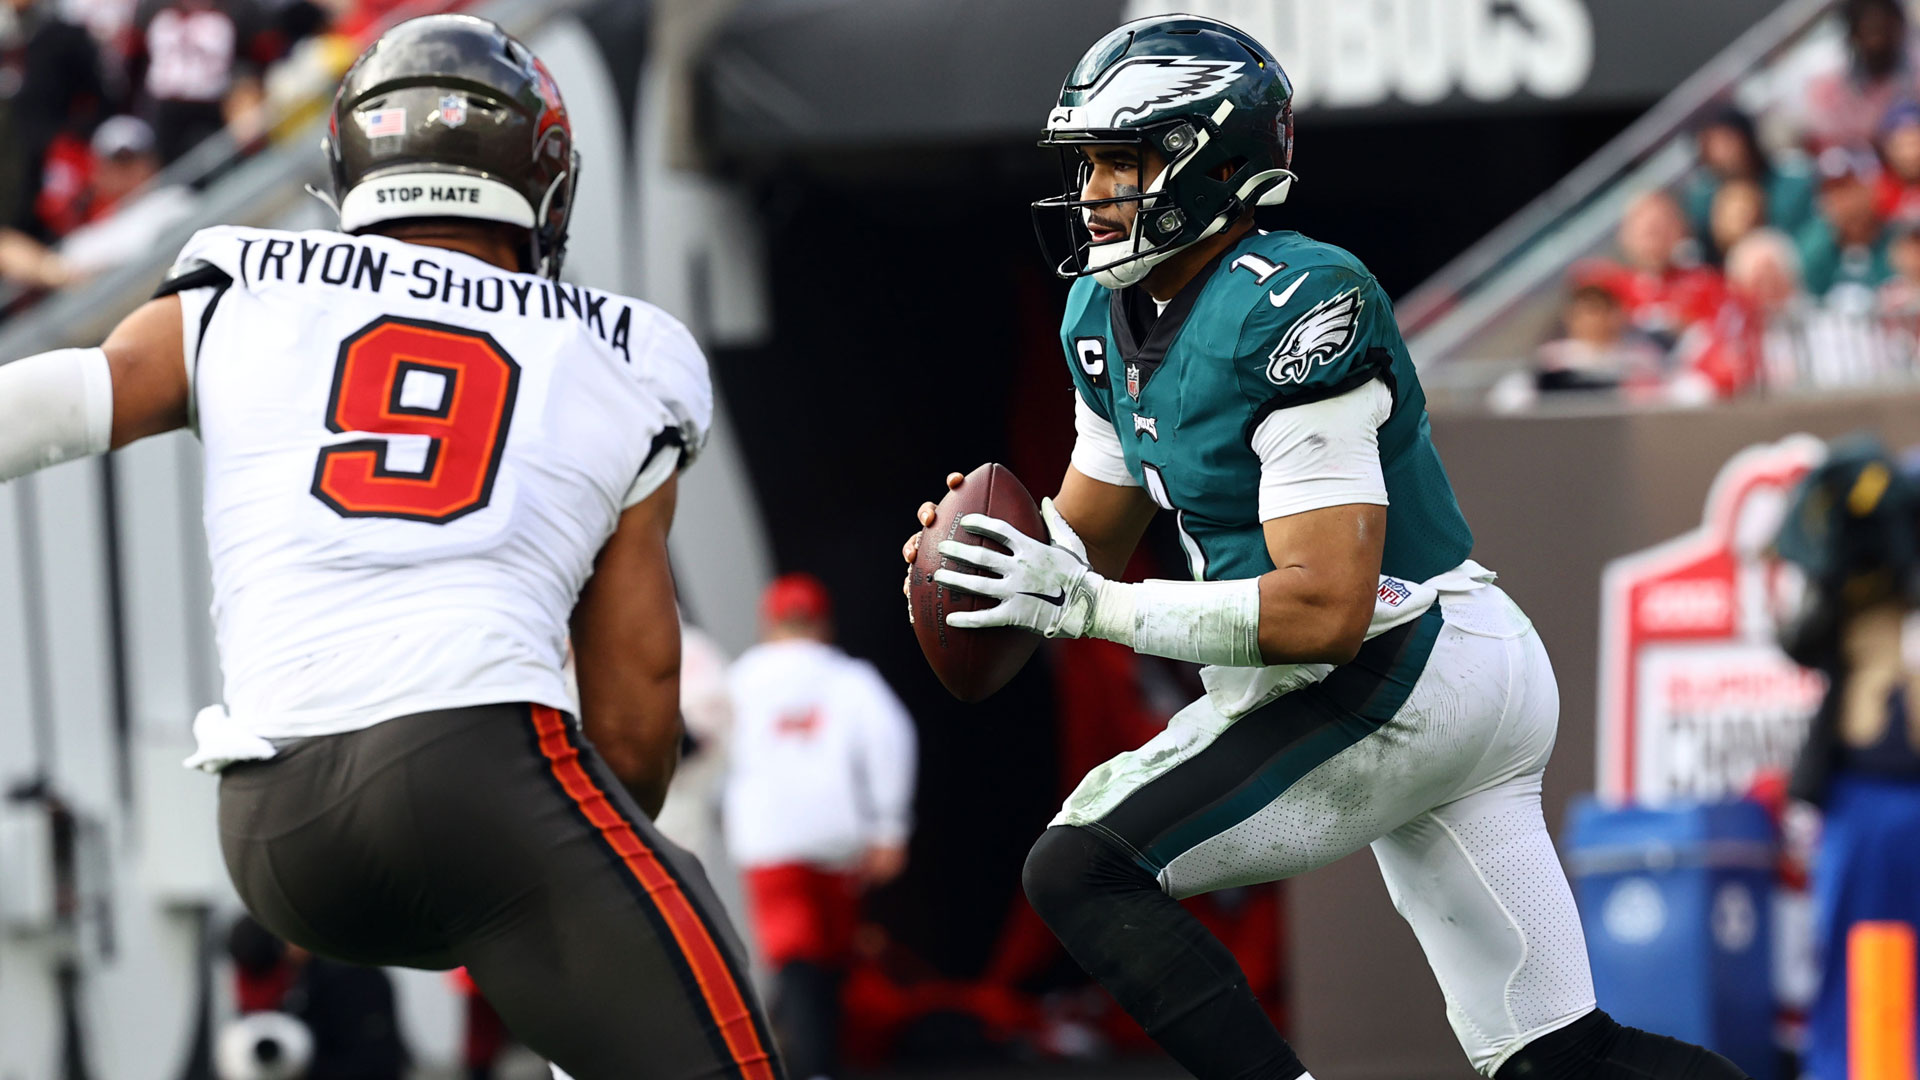 Eagles vs. Bucs Week 3 odds: Spread, moneyline and more – NBC